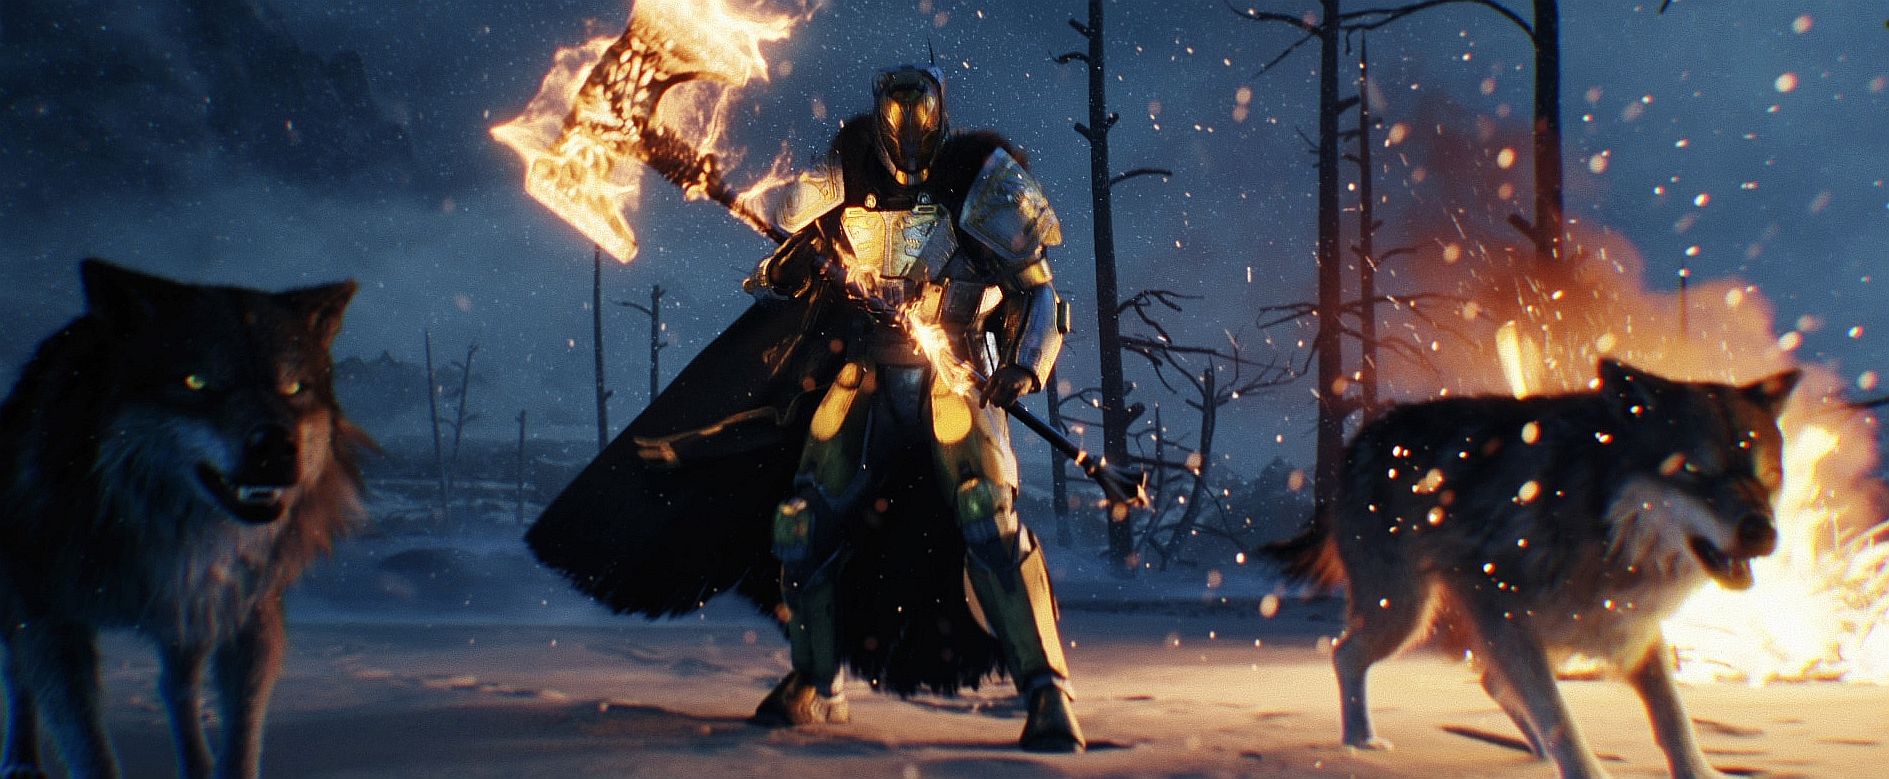 Image for Destiny: Rise of Iron - here's the reveal trailer